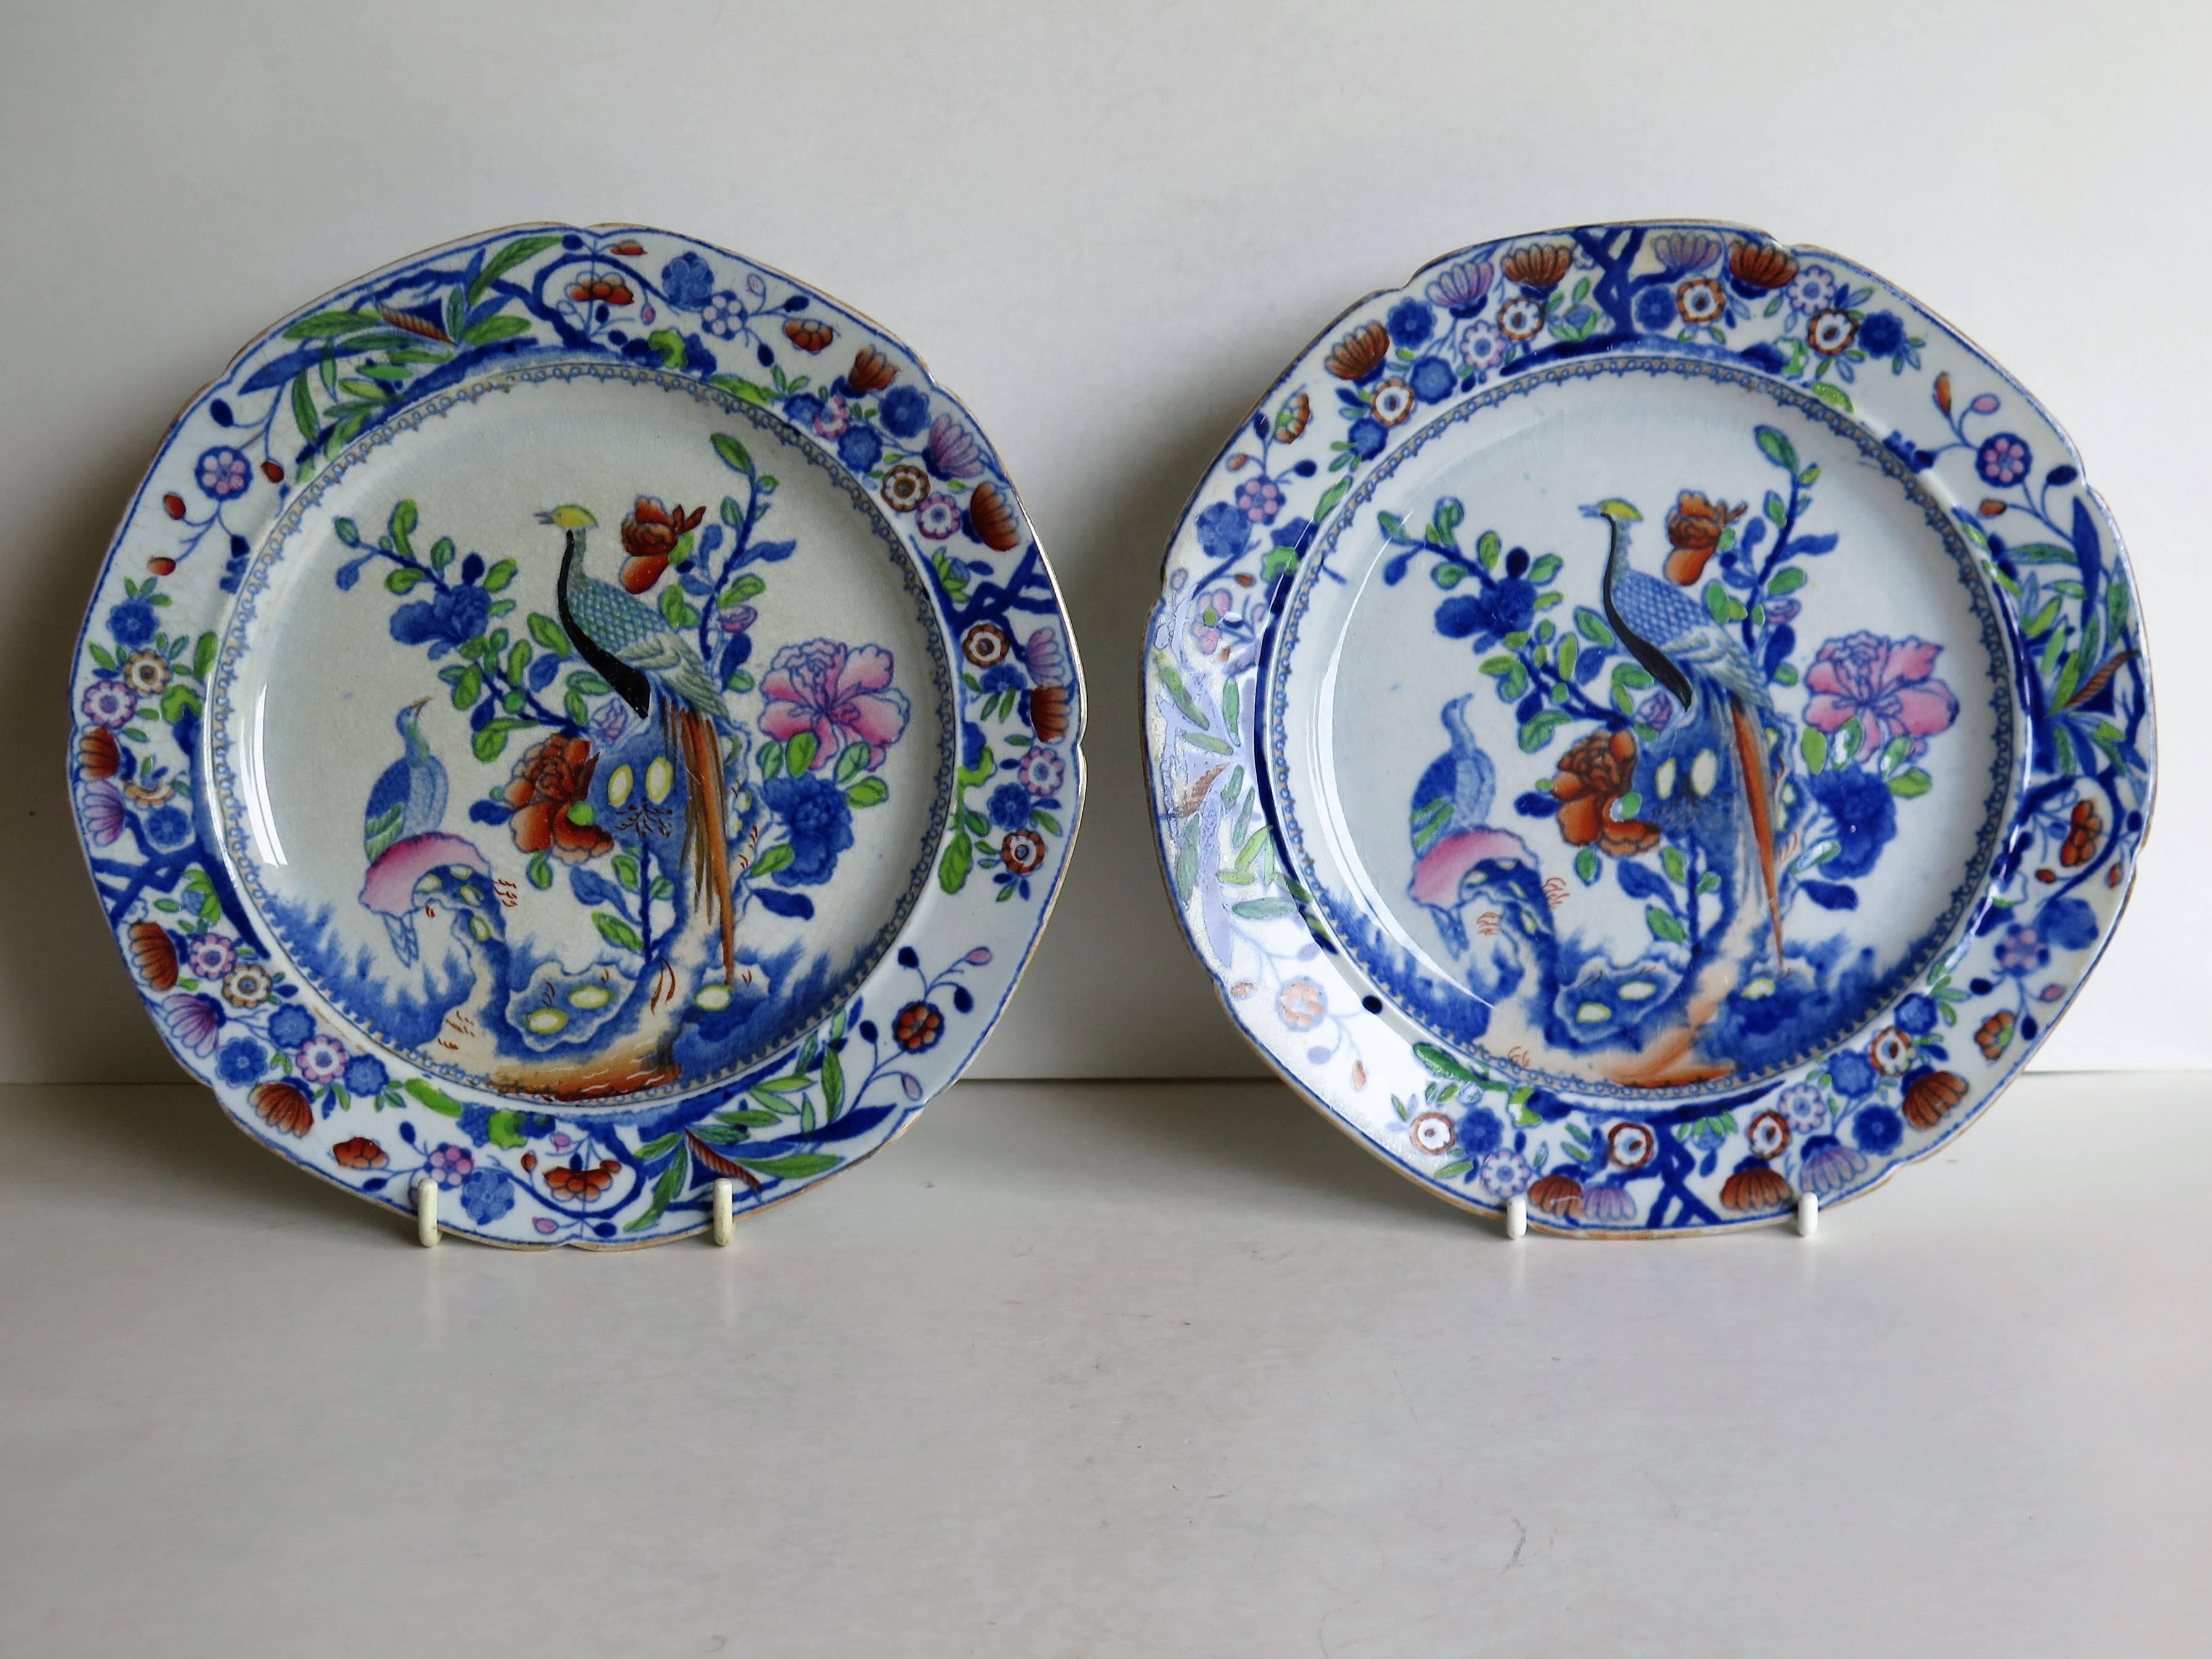 These are a very decorative pair of side plates by Mason's Ironstone, Lane Delph, England in the oriental pheasant pattern, dating to the early period of Mason's ironstone, circa 1815.

Each plate is circular in shape with a notched rim and is